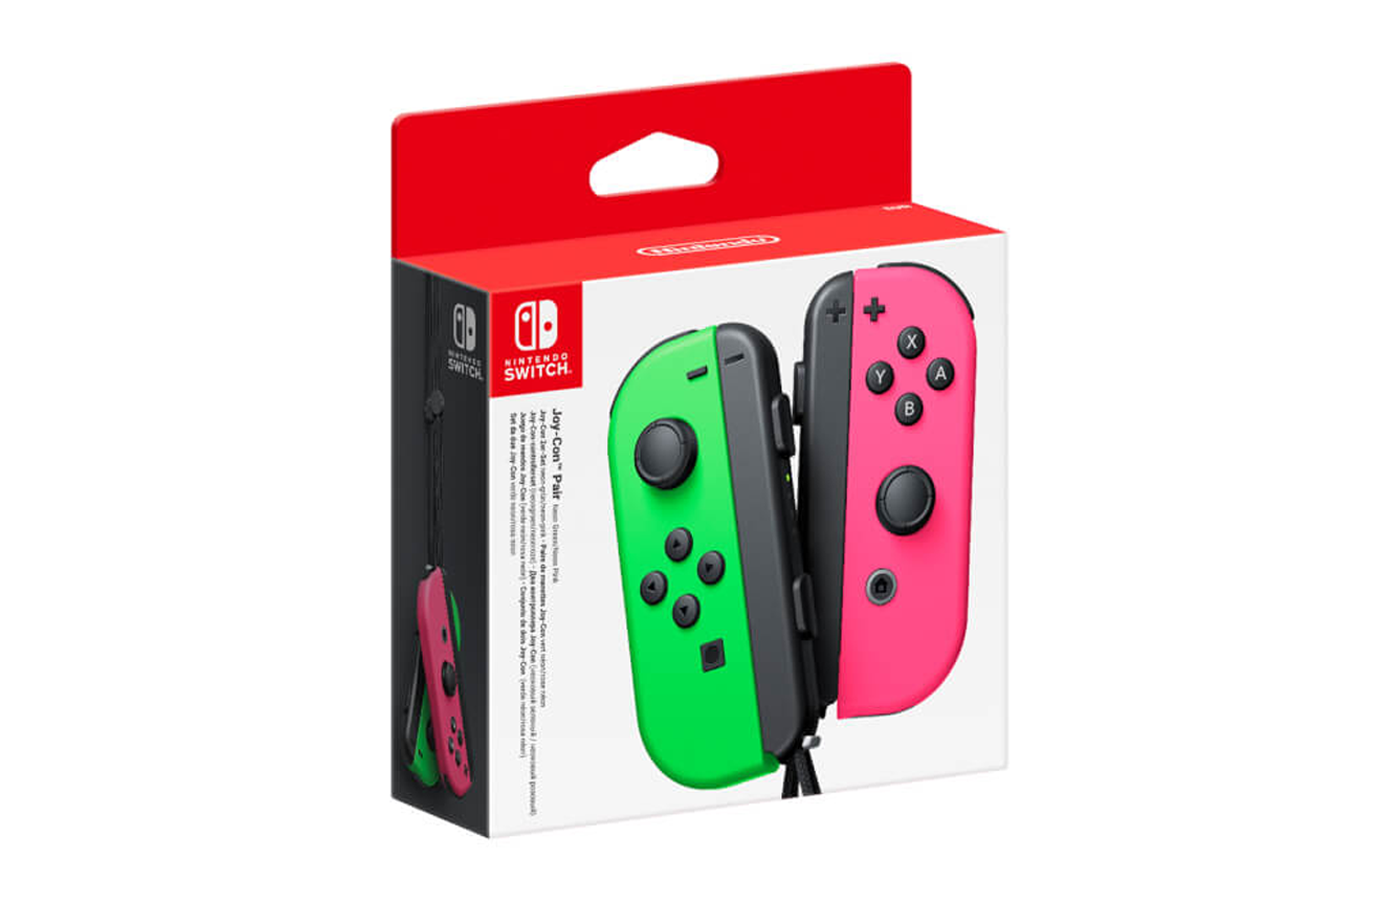 Neon Green and Neon Pink Joy-Con set (£69.99)